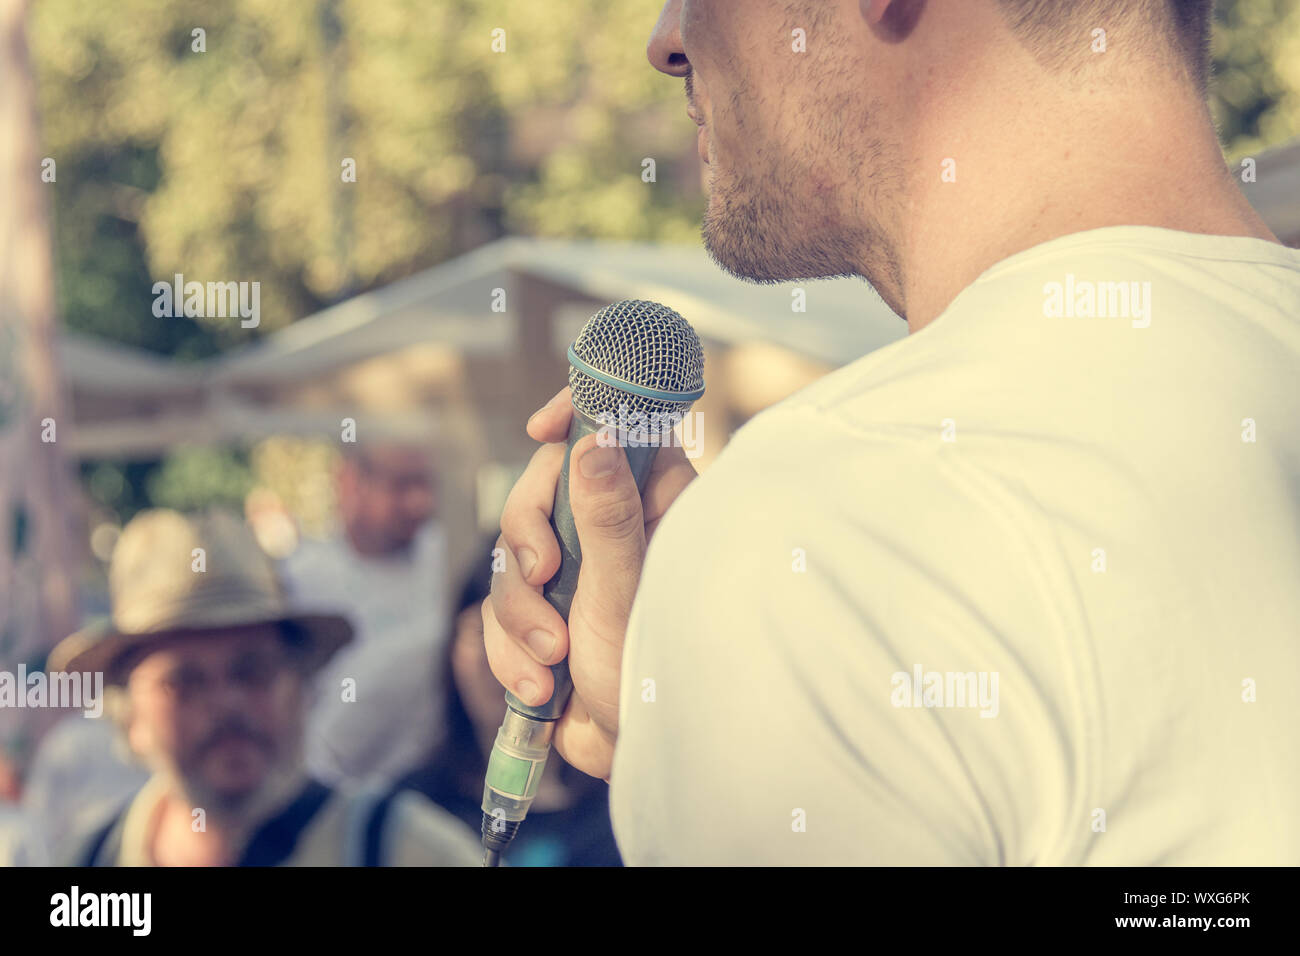 Man delivering a speach in front of live audience outdoor. Summer events in city. Stock Photo